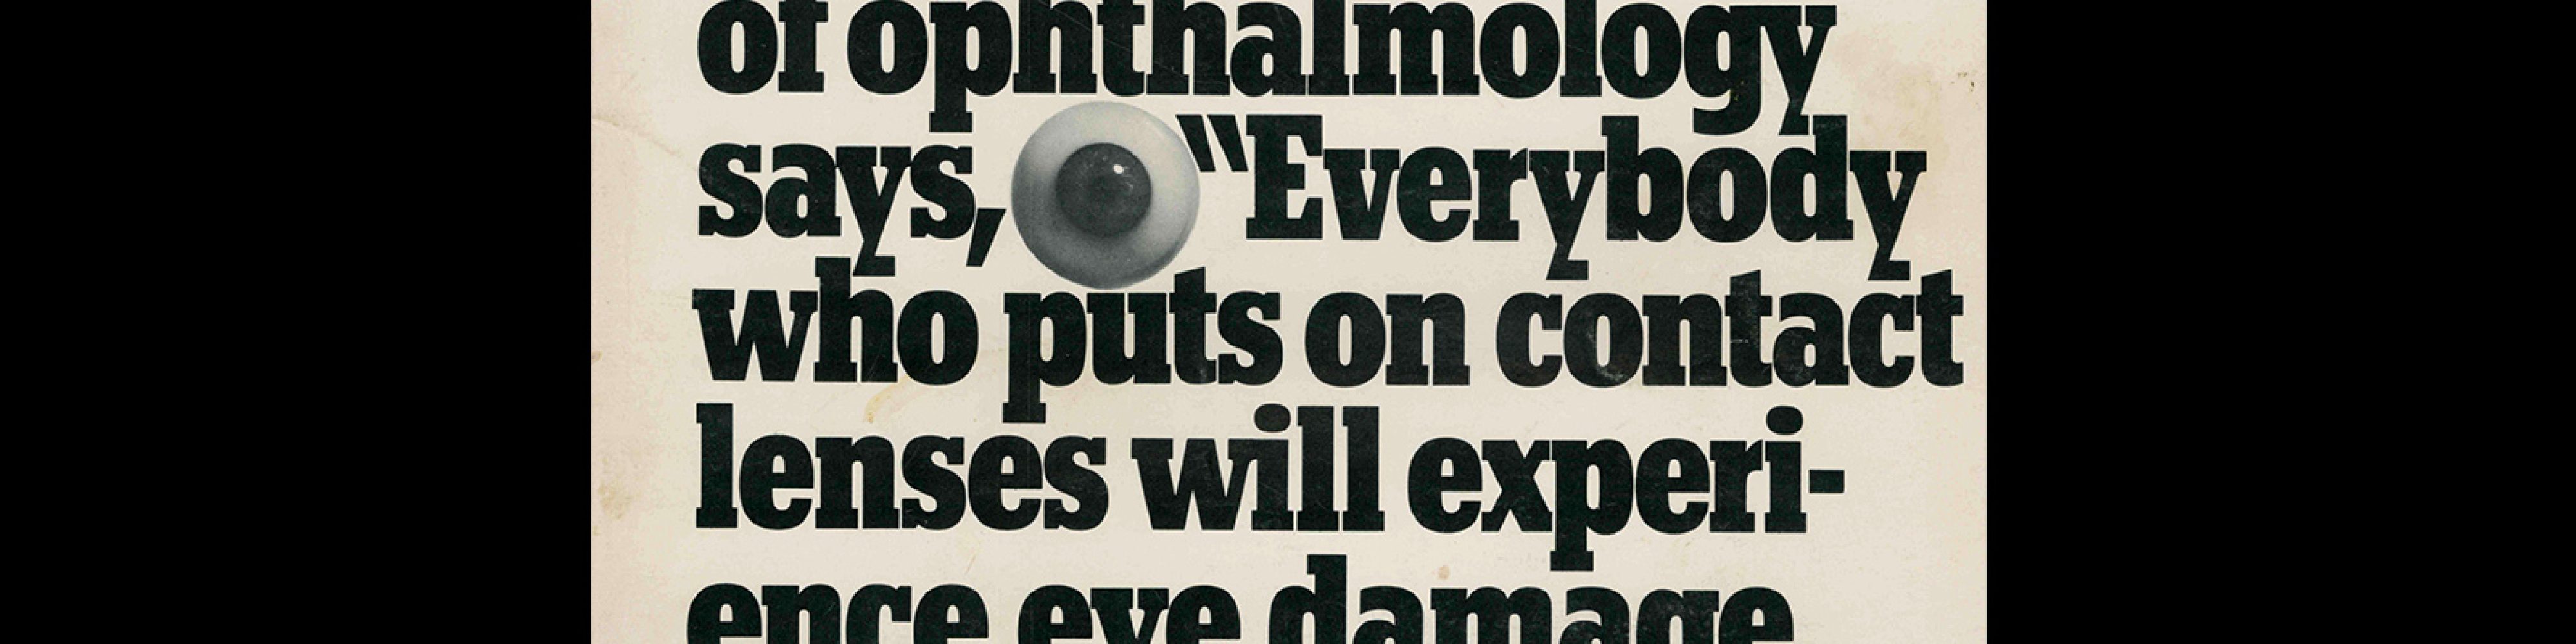 Fact, Volume Three, Issue Five, 1966. Designed by Herb Lubalin